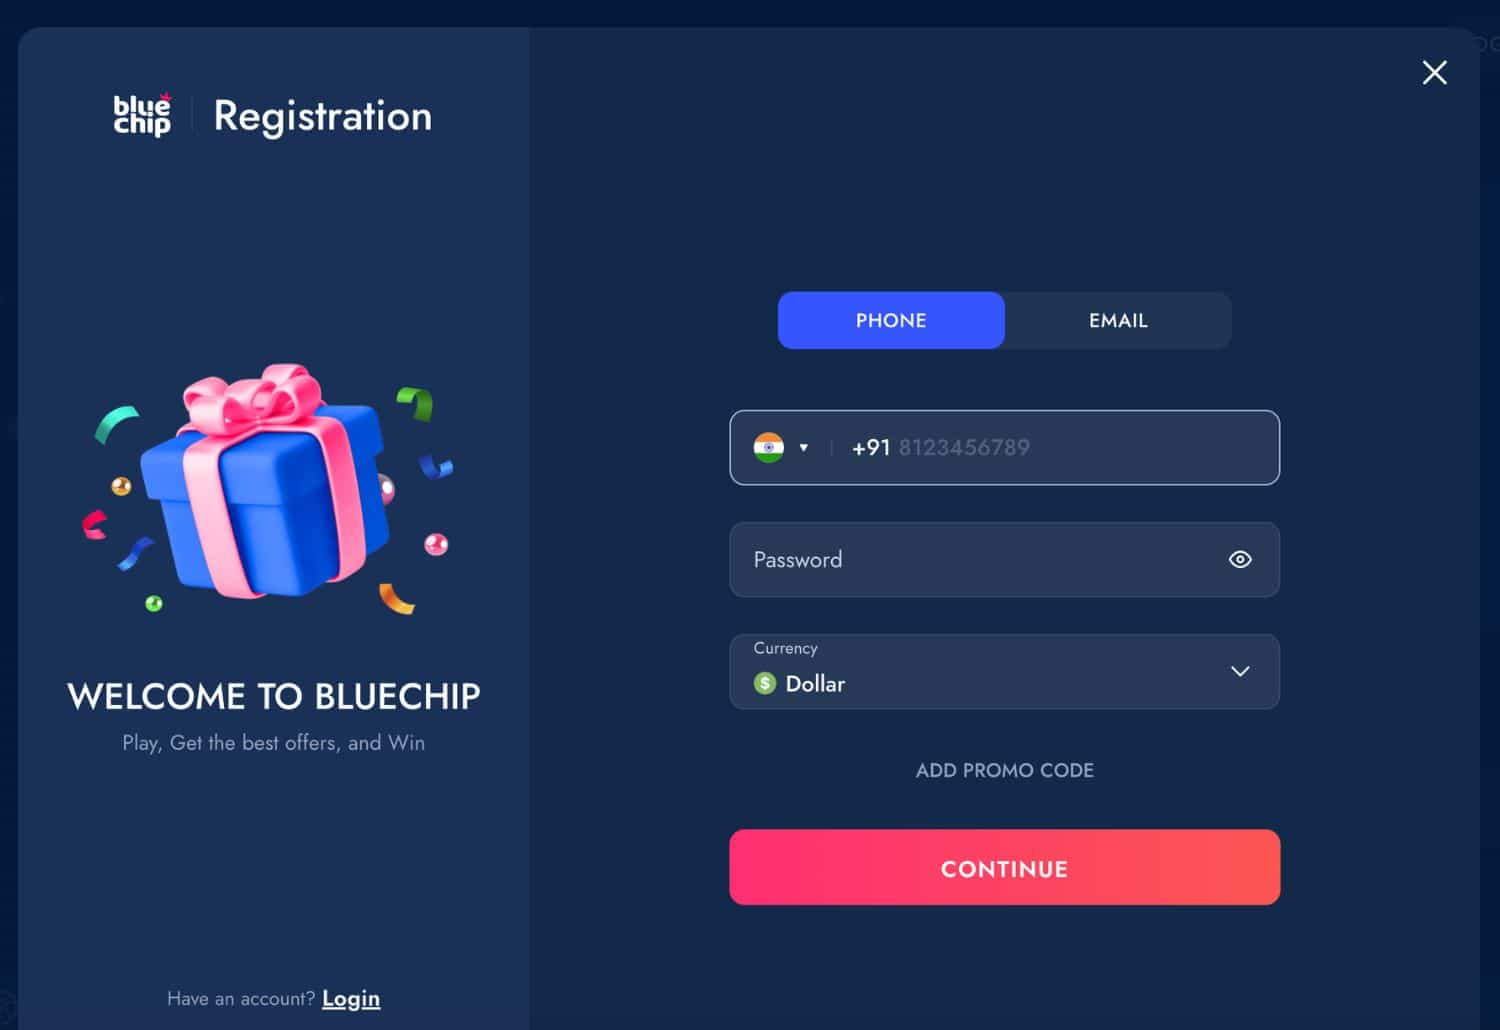 How to sign up at Bluechip Casino and bookmaker in India